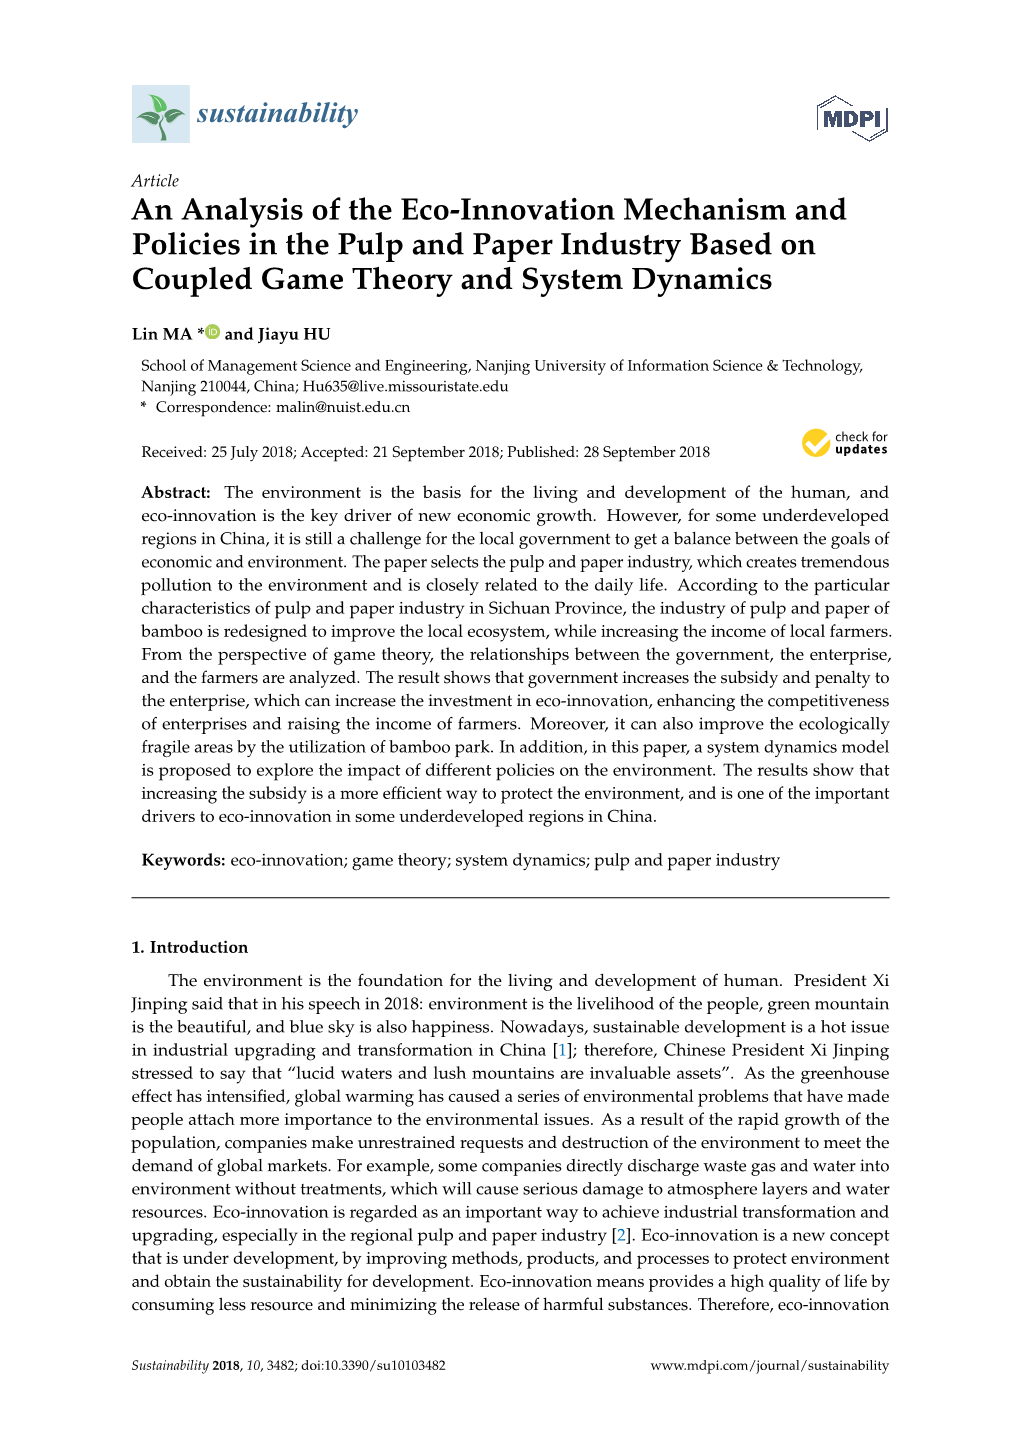 An Analysis of the Eco-Innovation Mechanism and Policies in the Pulp and Paper Industry Based on Coupled Game Theory and System Dynamics